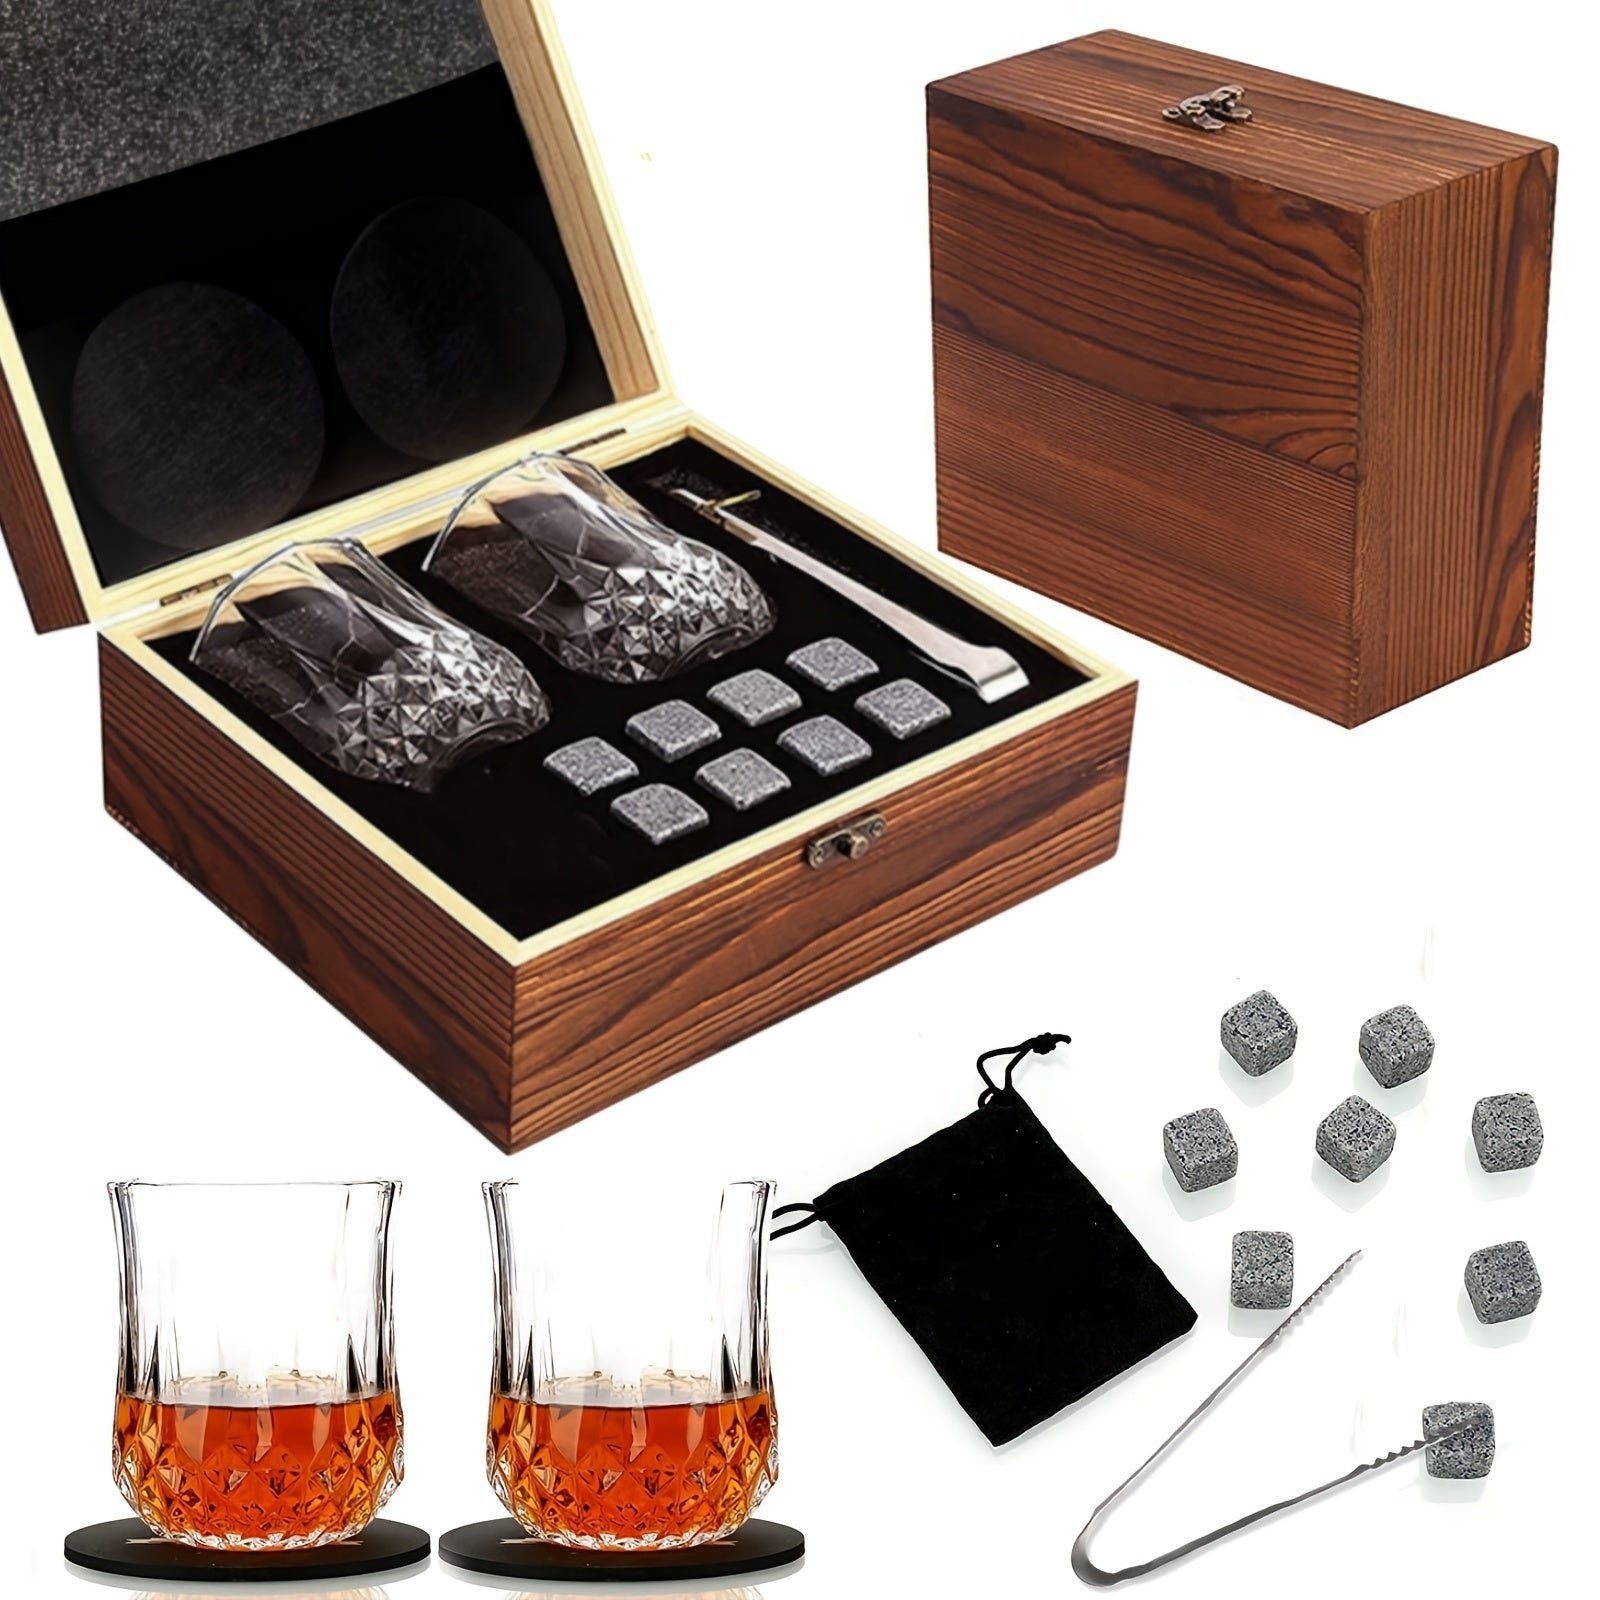 1 Set Gift Box Kit For Whiskey Stones And Whiskey Glass, 8pcs Granite Chilling Whisky Rocks + 2pcs Glasses Cup, With Wooden Storage Box, Best Gift For Men, Father's Day Dad's Birthday Thanksgiving New Year Gift - Le Coin Du Barman : Le Spécialiste Des Cocktails